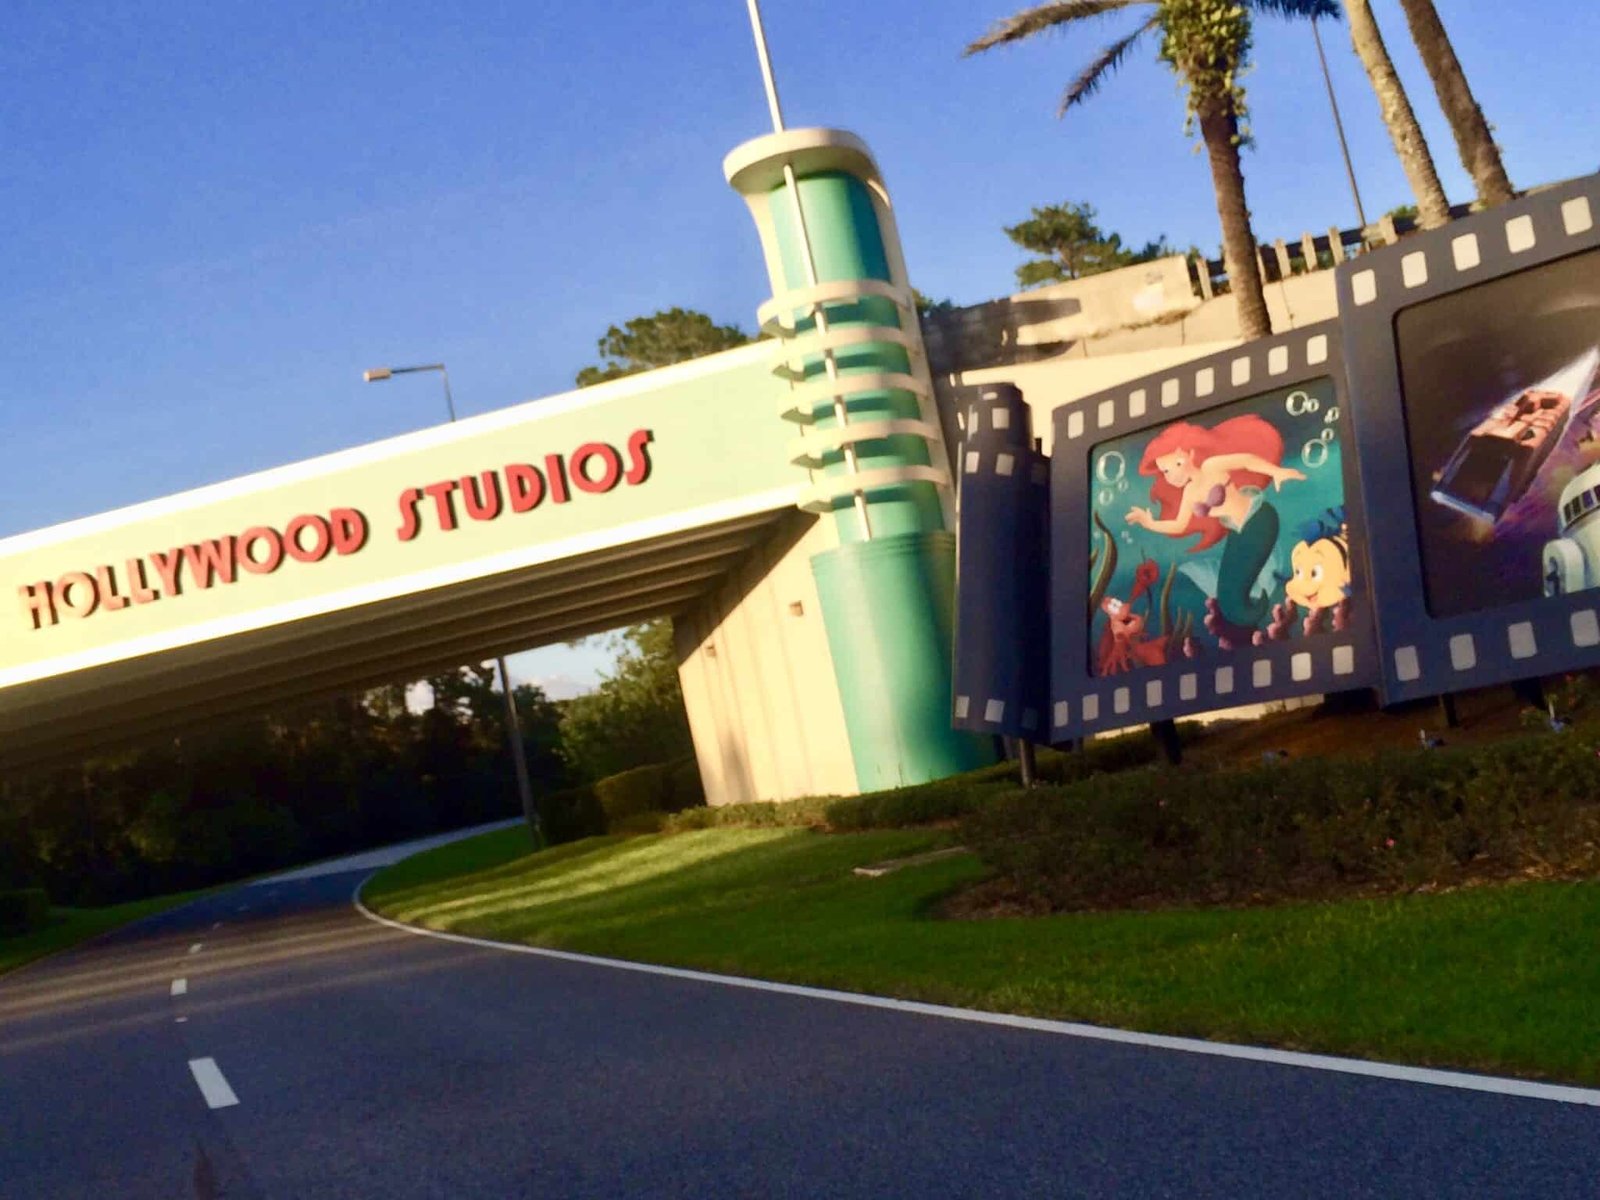 The Best Rides at Hollywood Studios - Planning The Magic